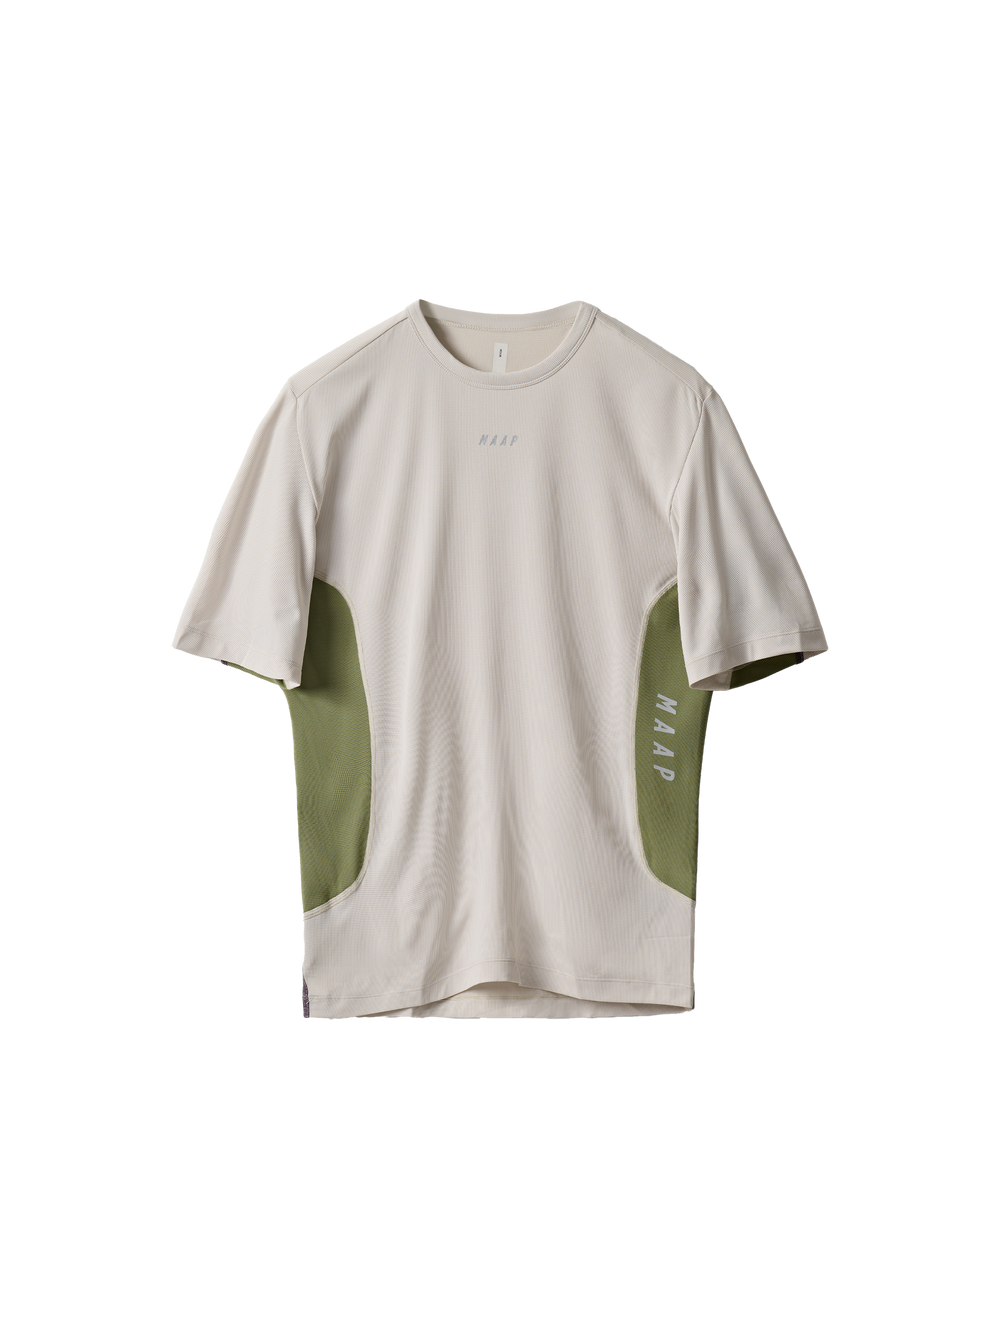 Product Image for Alt_Road Tech Tee